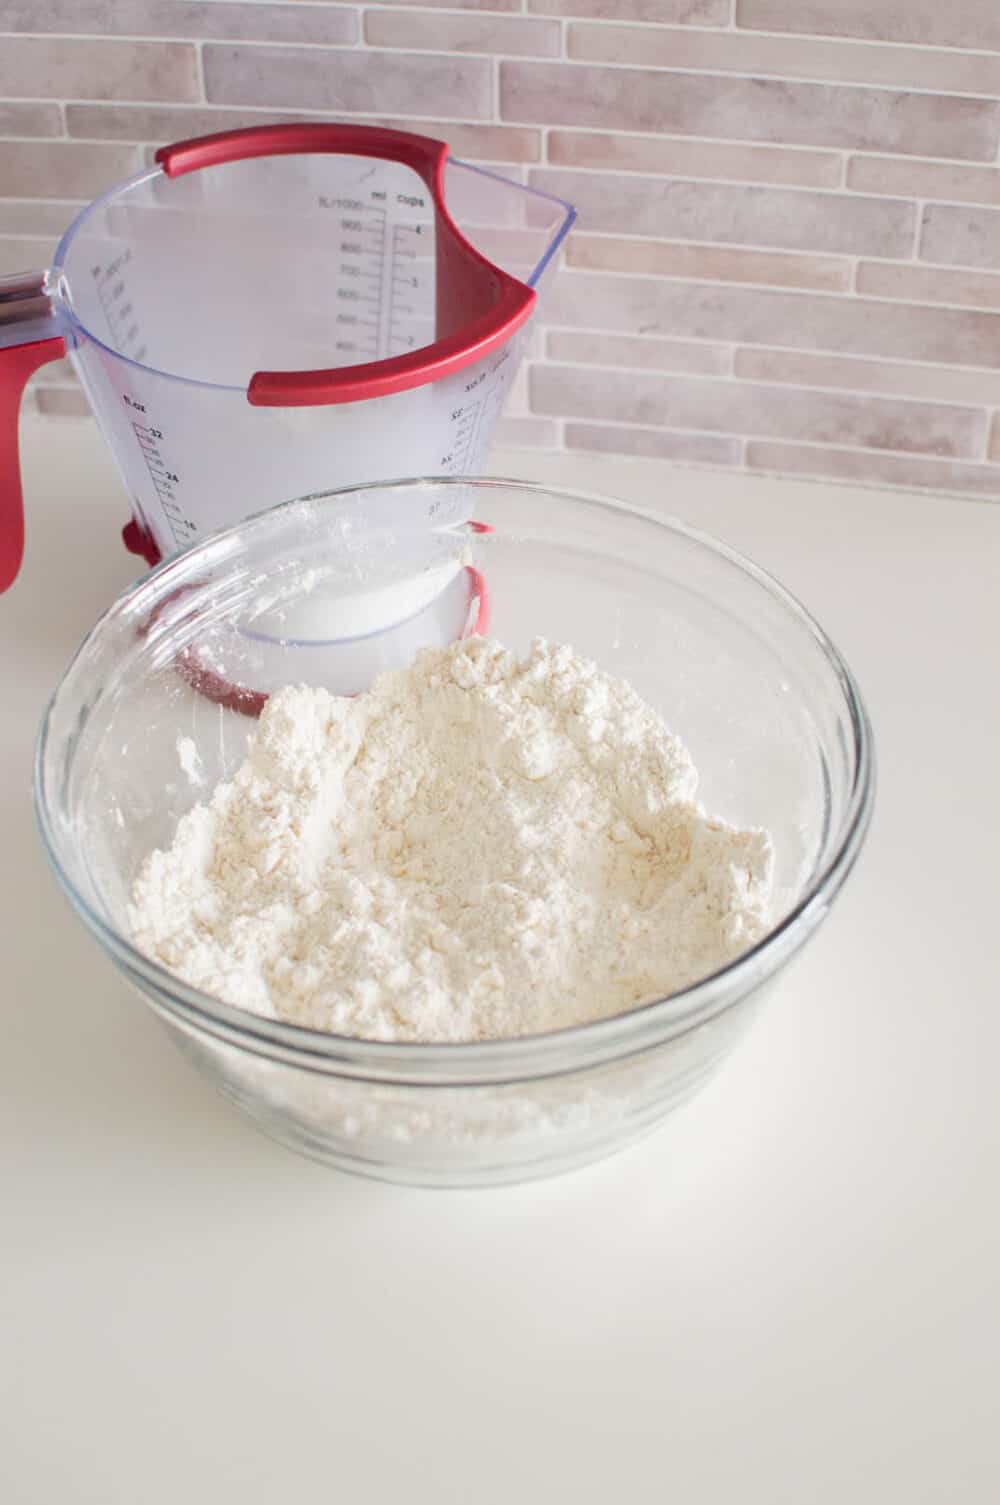 Butter cut into a bowl of dry ingredients, with a liquid measuring cup in the background